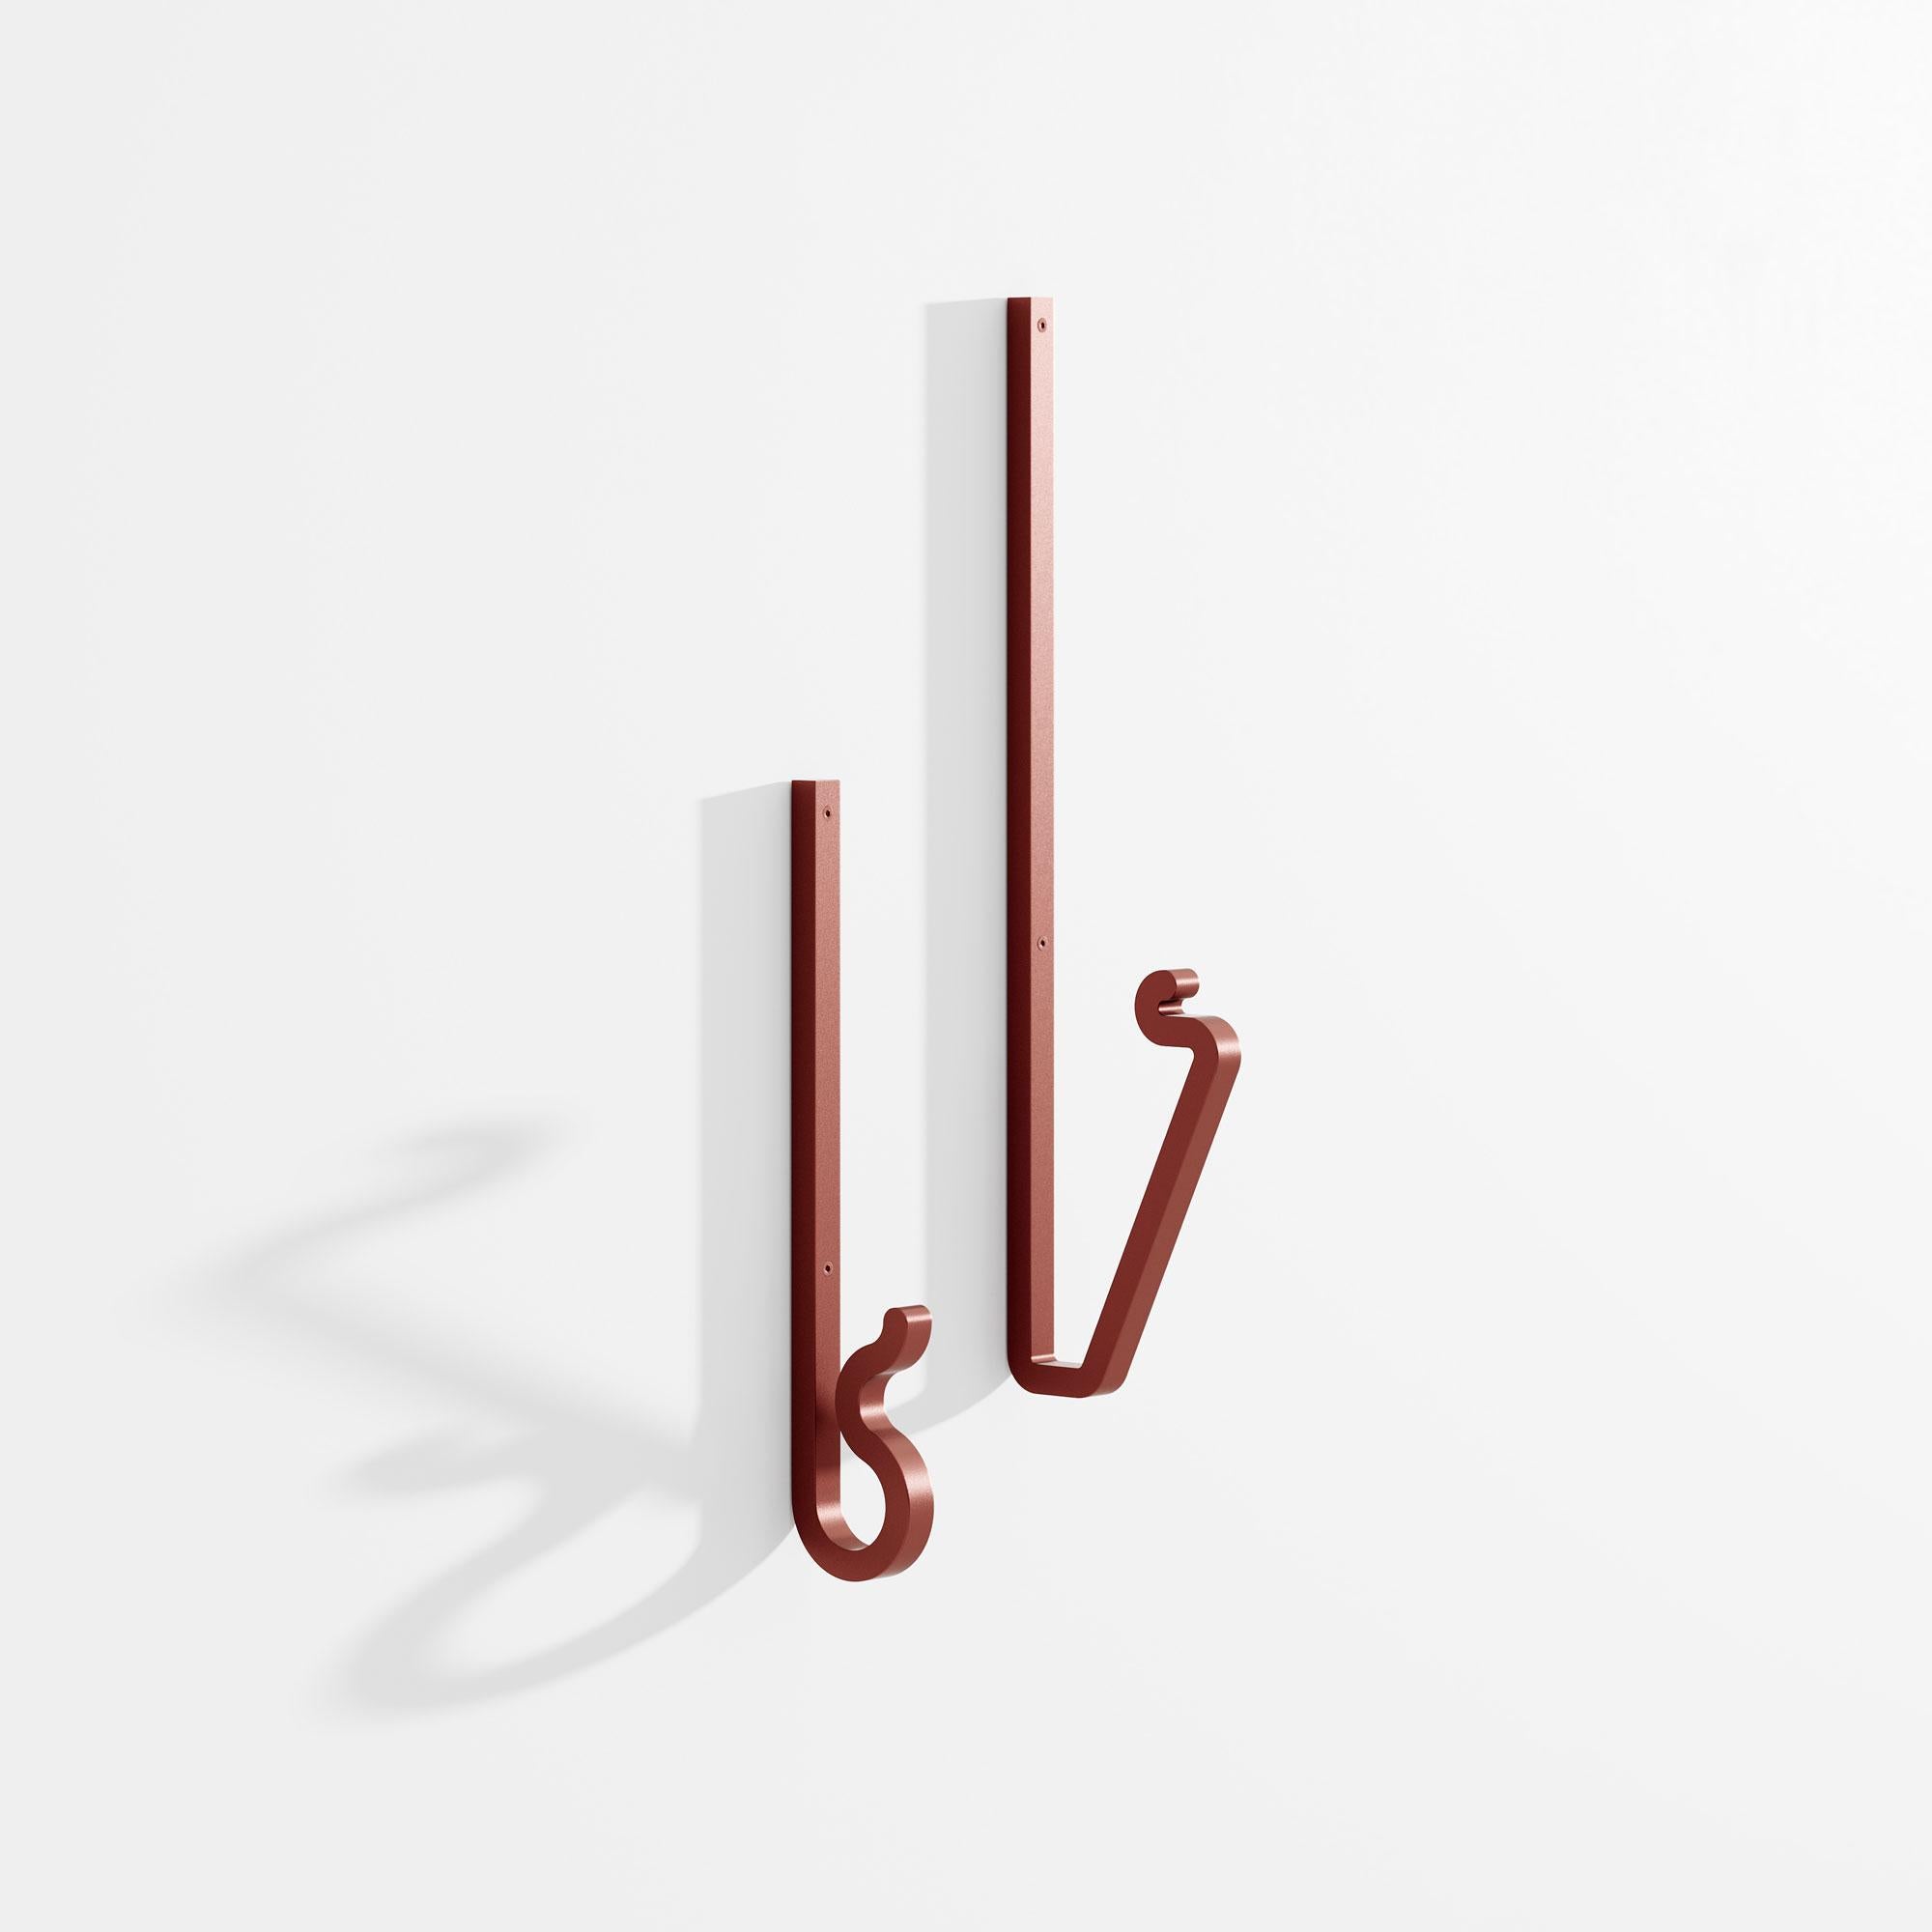 Set of 2 Zag coat hanger by Bling Desing Studio
Dimensions: H 25,5 x L5 - H 36,5 x L9
Materials: old red textured metal


Zag is a family of coat hooks whose shapes are inspired by barrettes and pins. Each Zag is like an imaginary letter that